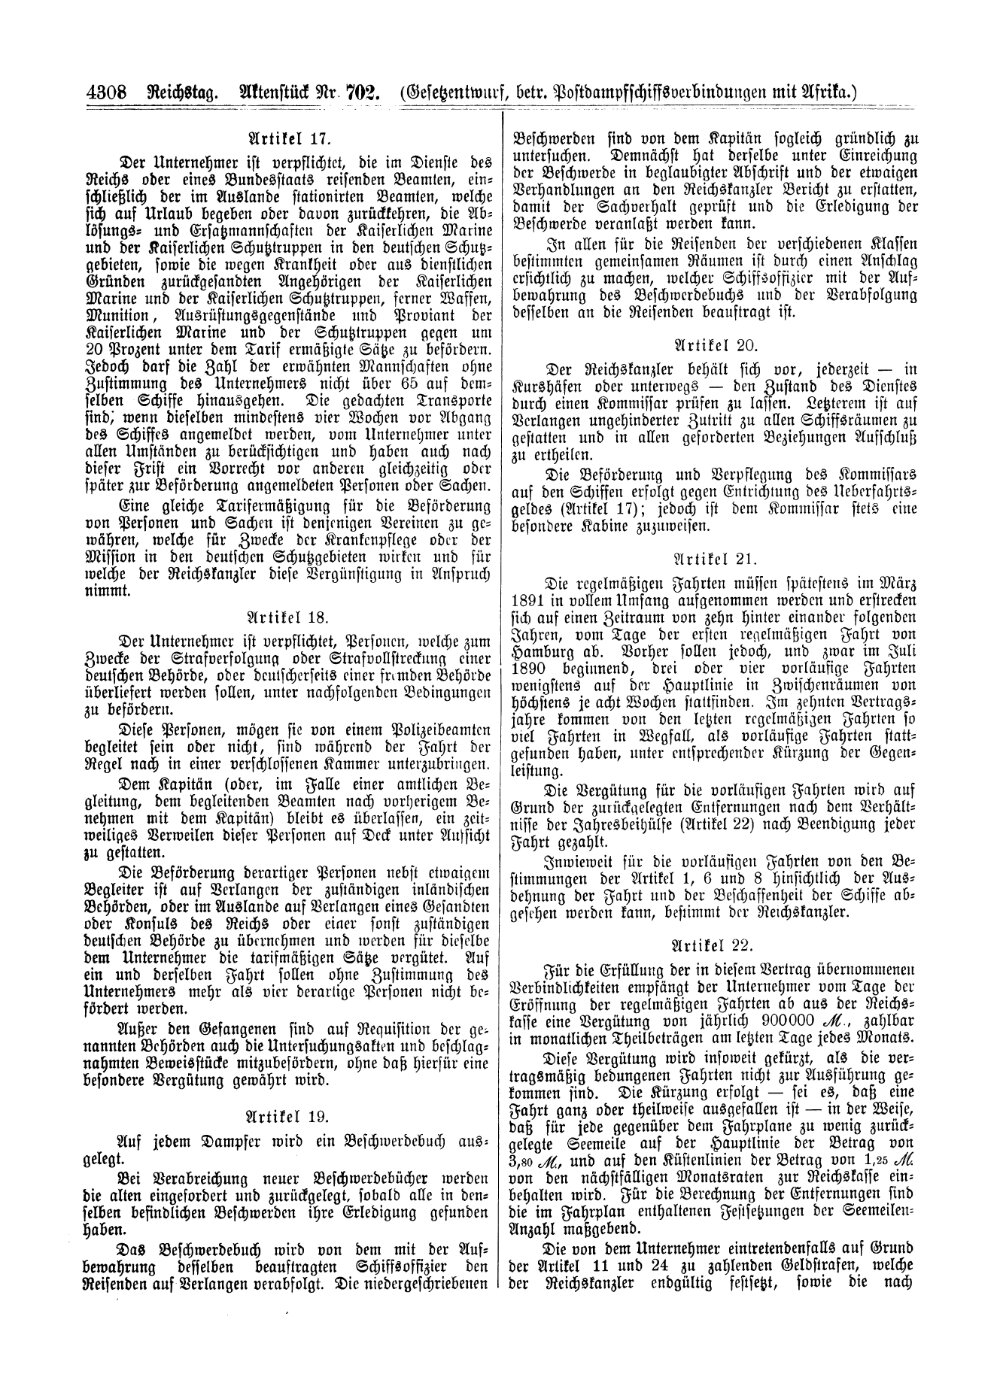 Scan of page 4308